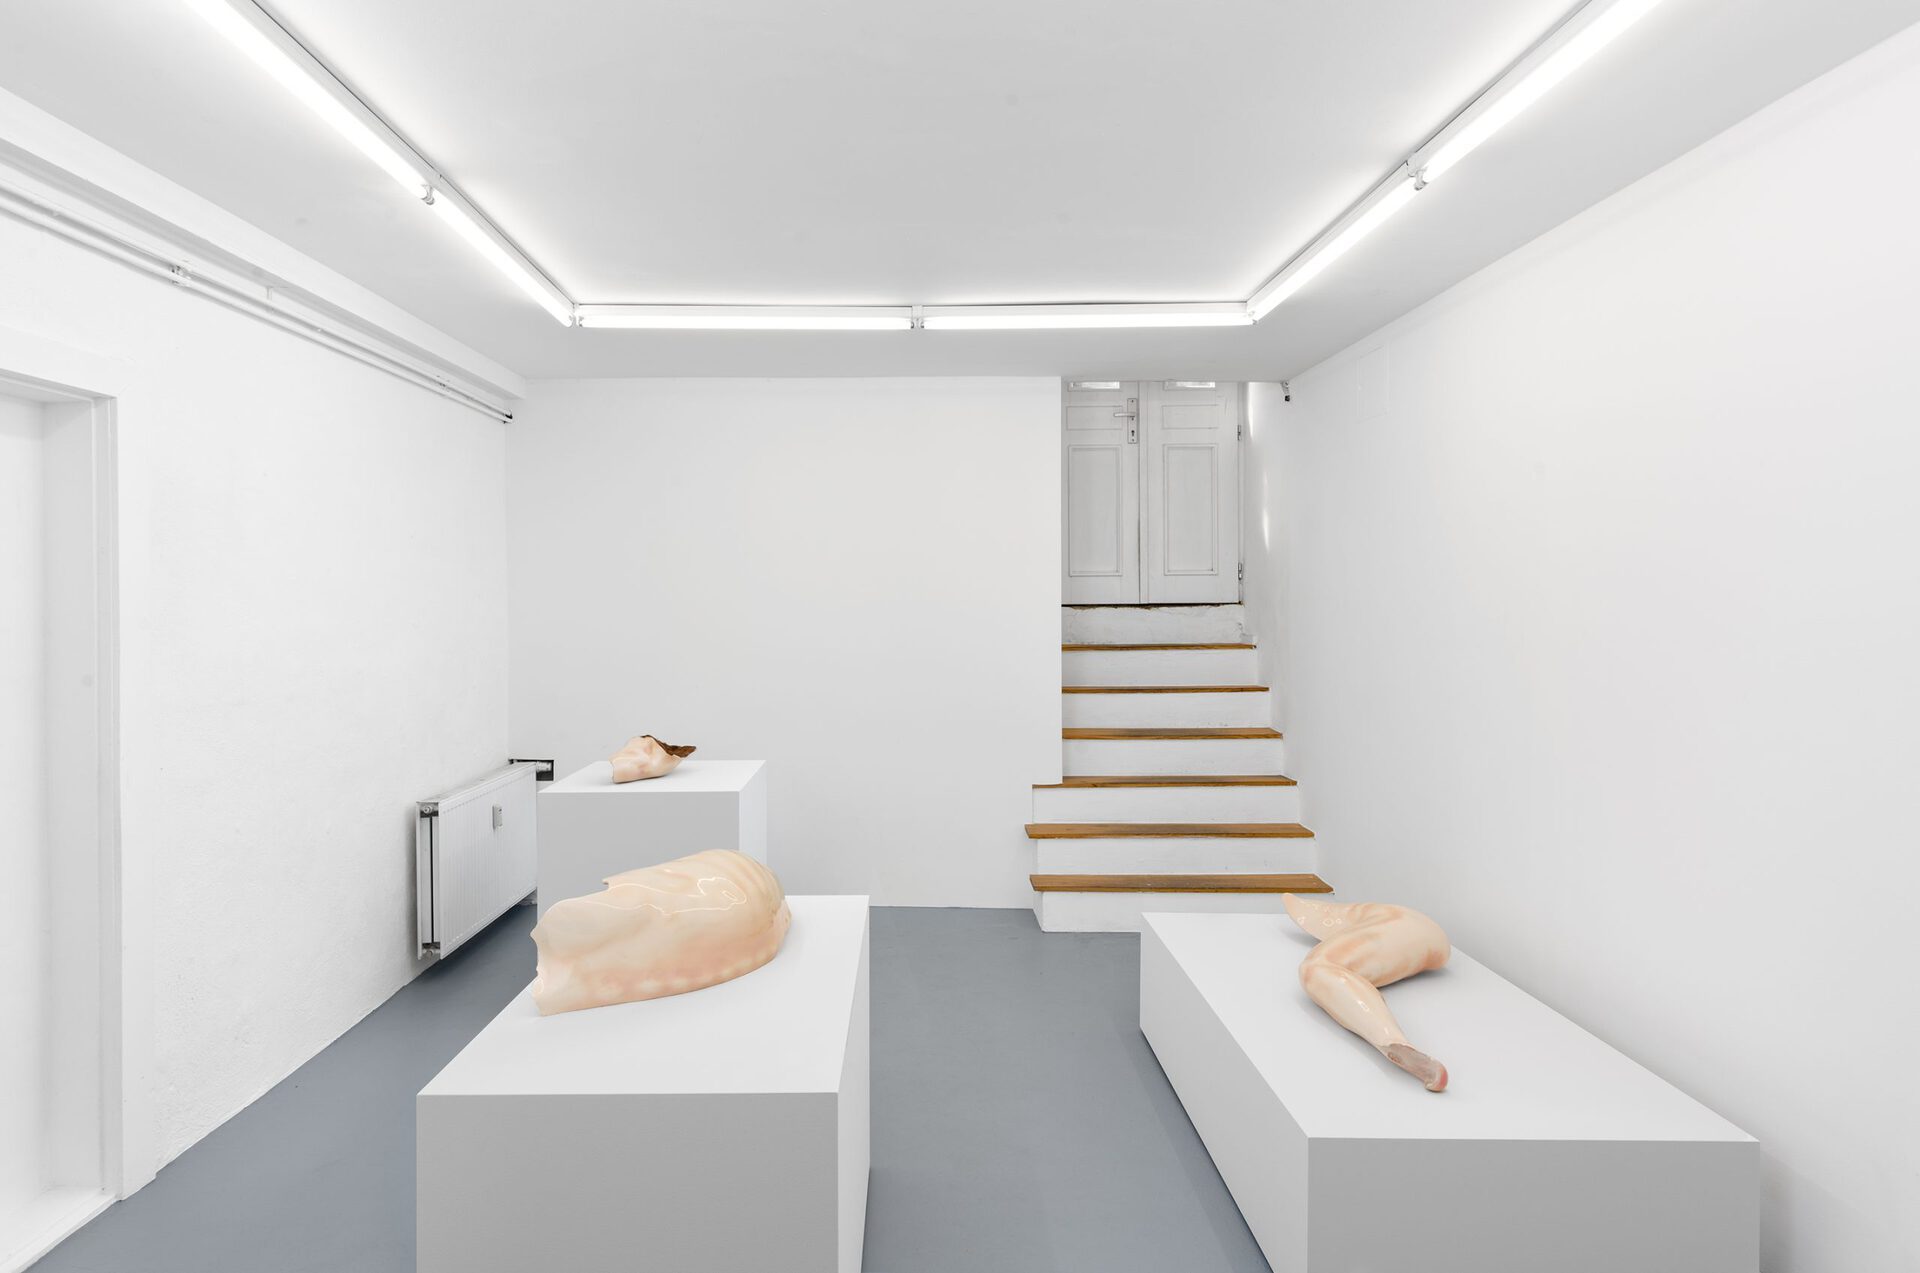 Doruntina Kastrati, "HERE (AIR CARRIES POISON BUT YET WE BREATHE)", installation view at BUNGALOW, 2021, Berlin